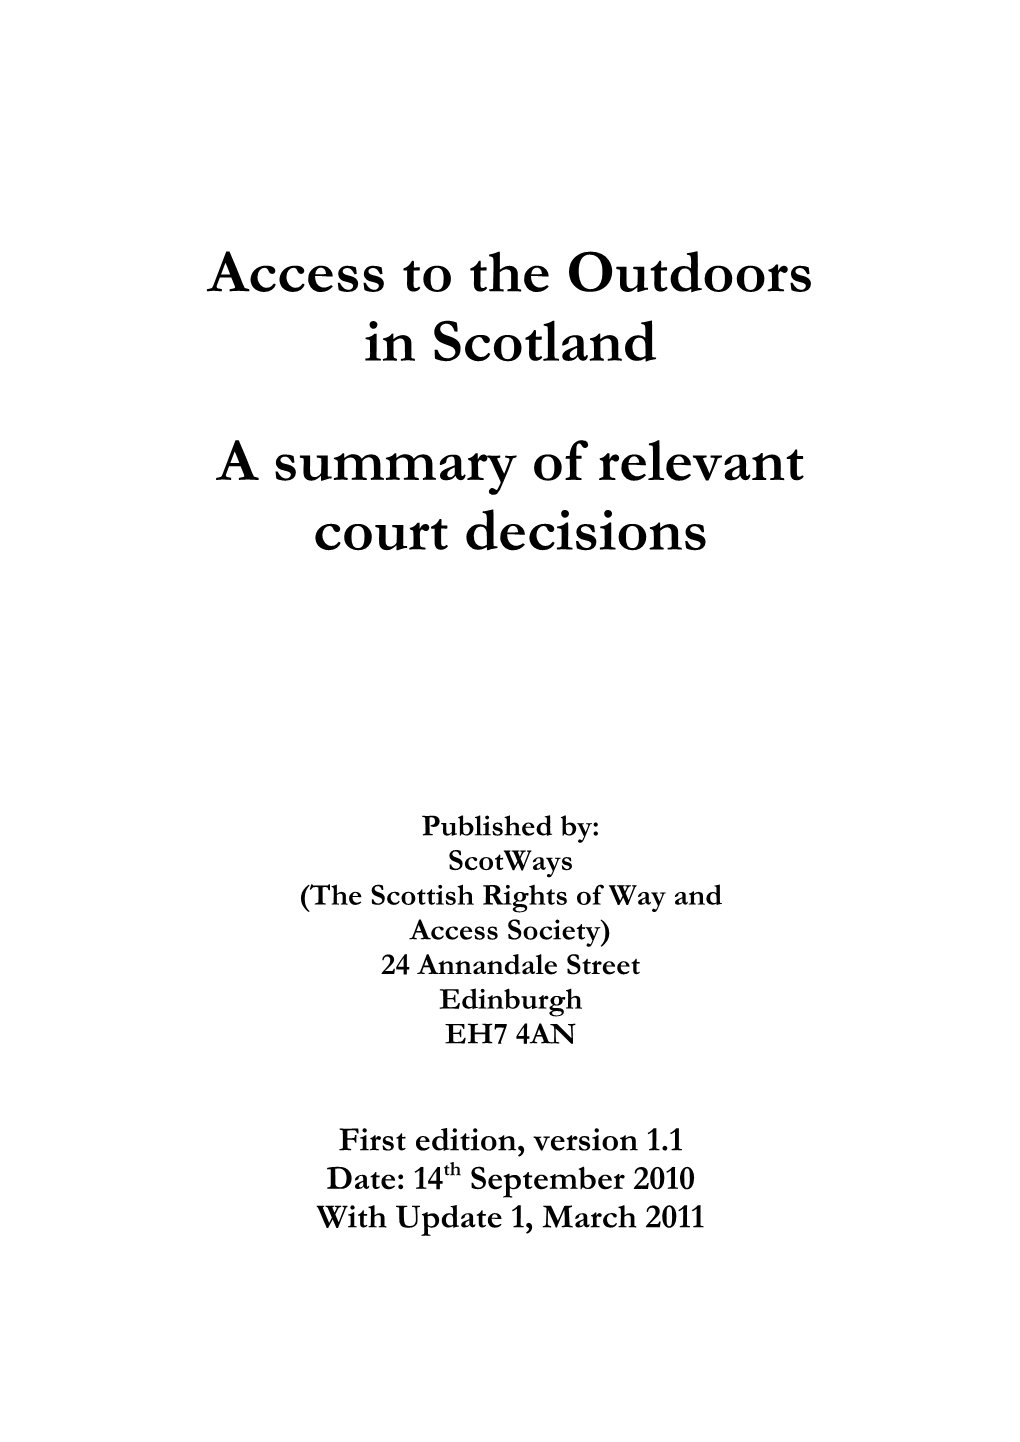 Access to the Outdoors in Scotland